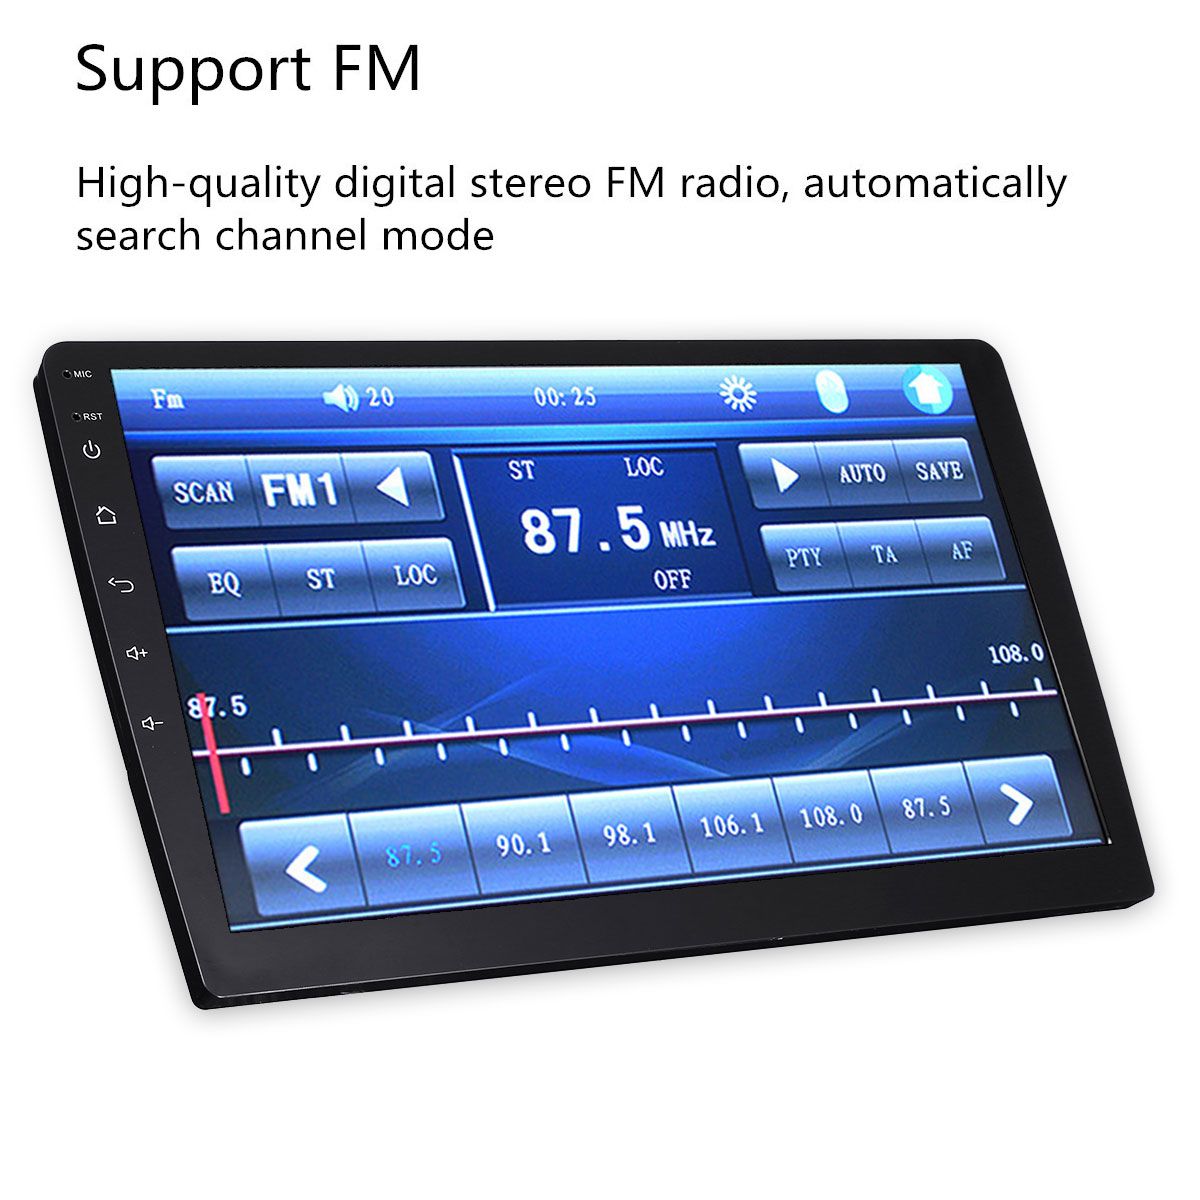 6800-101-Inch-2-DIN-Car-MP5-Player-Quad-Core-116G-Stereo-Radio-IPS-Touch-Screen-bluetooth-FM-DAB-DVR-1497880